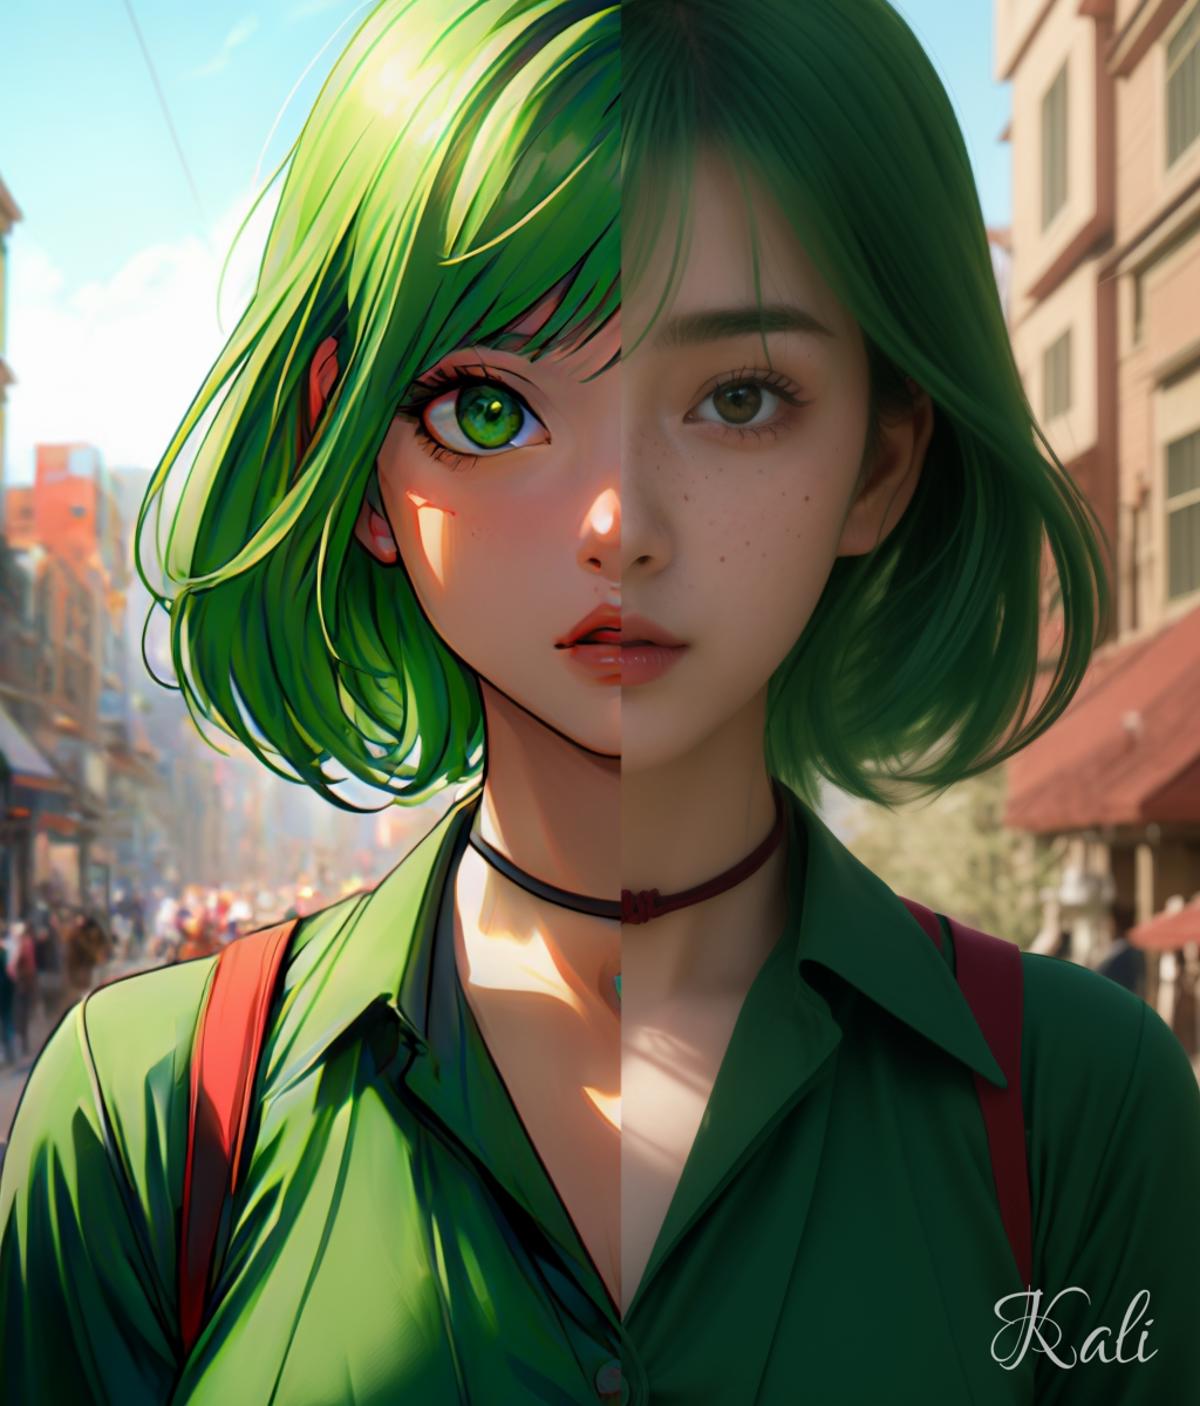 30yo Japanese woman,

green eyes, green hair, 
standing in a red town square,
open green shirt,

shading, sunspots, deep s...